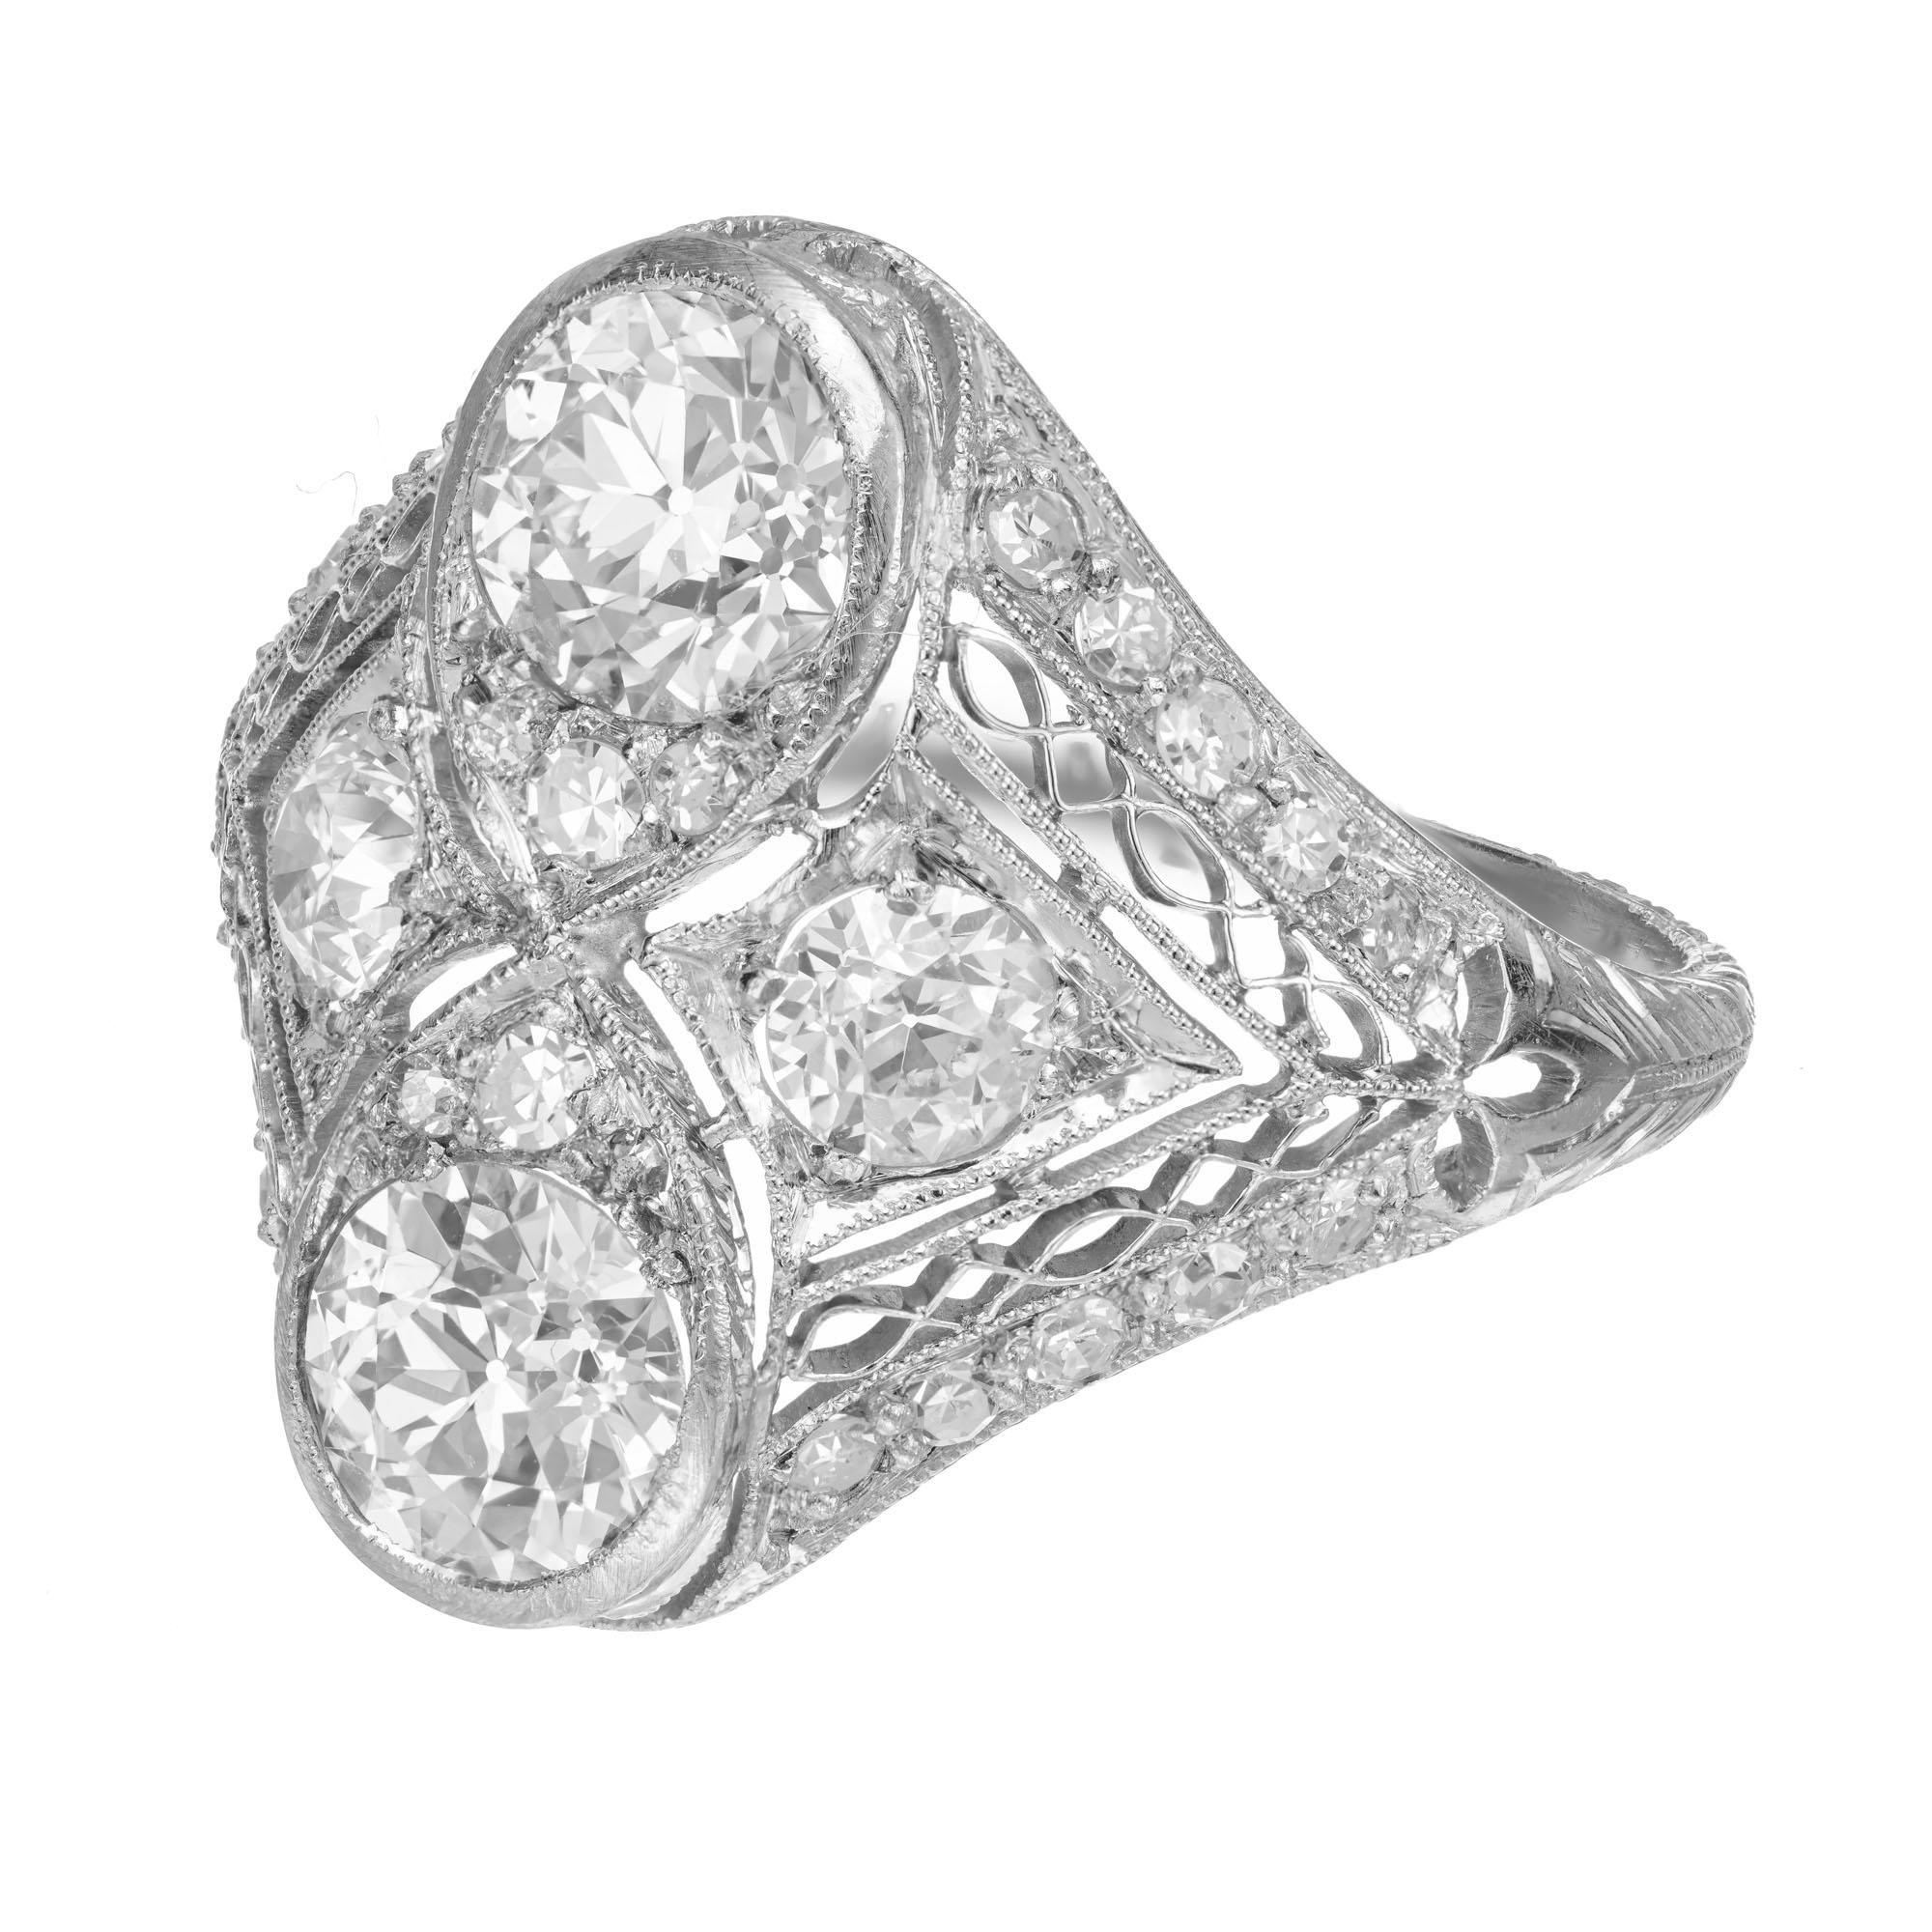 Edwardian diamond ring. 2 Old European cut center stones with two Old European round side diamonds in a platinum filigree, engraved shank setting with 20 accent diamonds. circa 1910.

2 old European cut diamonds, approx. total weight 1.62cts, H – I,